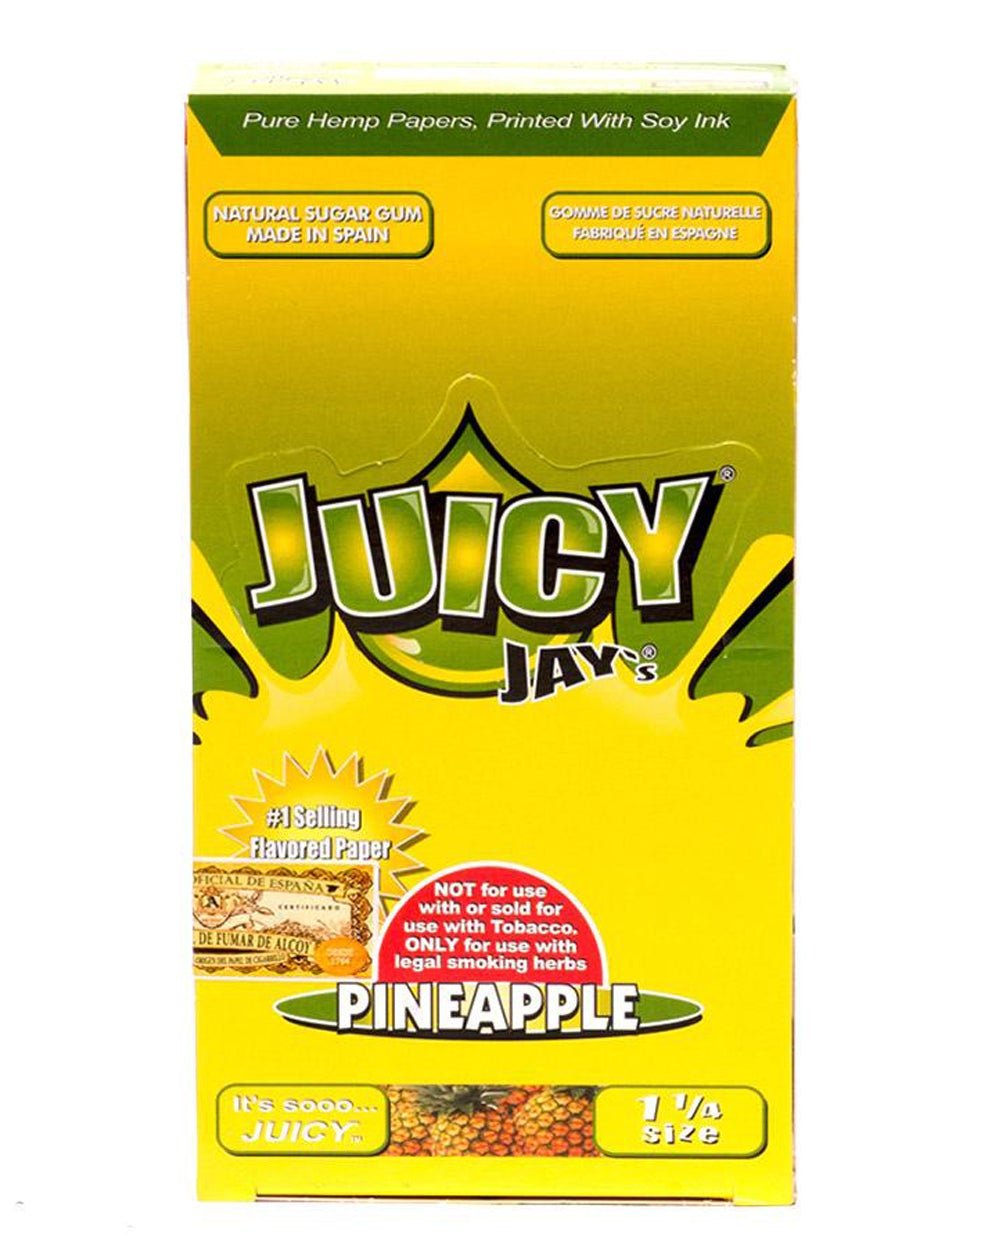 JUICY JAY'S | 'Retail Display' 1 1/4 Size Hemp Rolling Papers | 76mm - Pineapple - 24 Count - 2